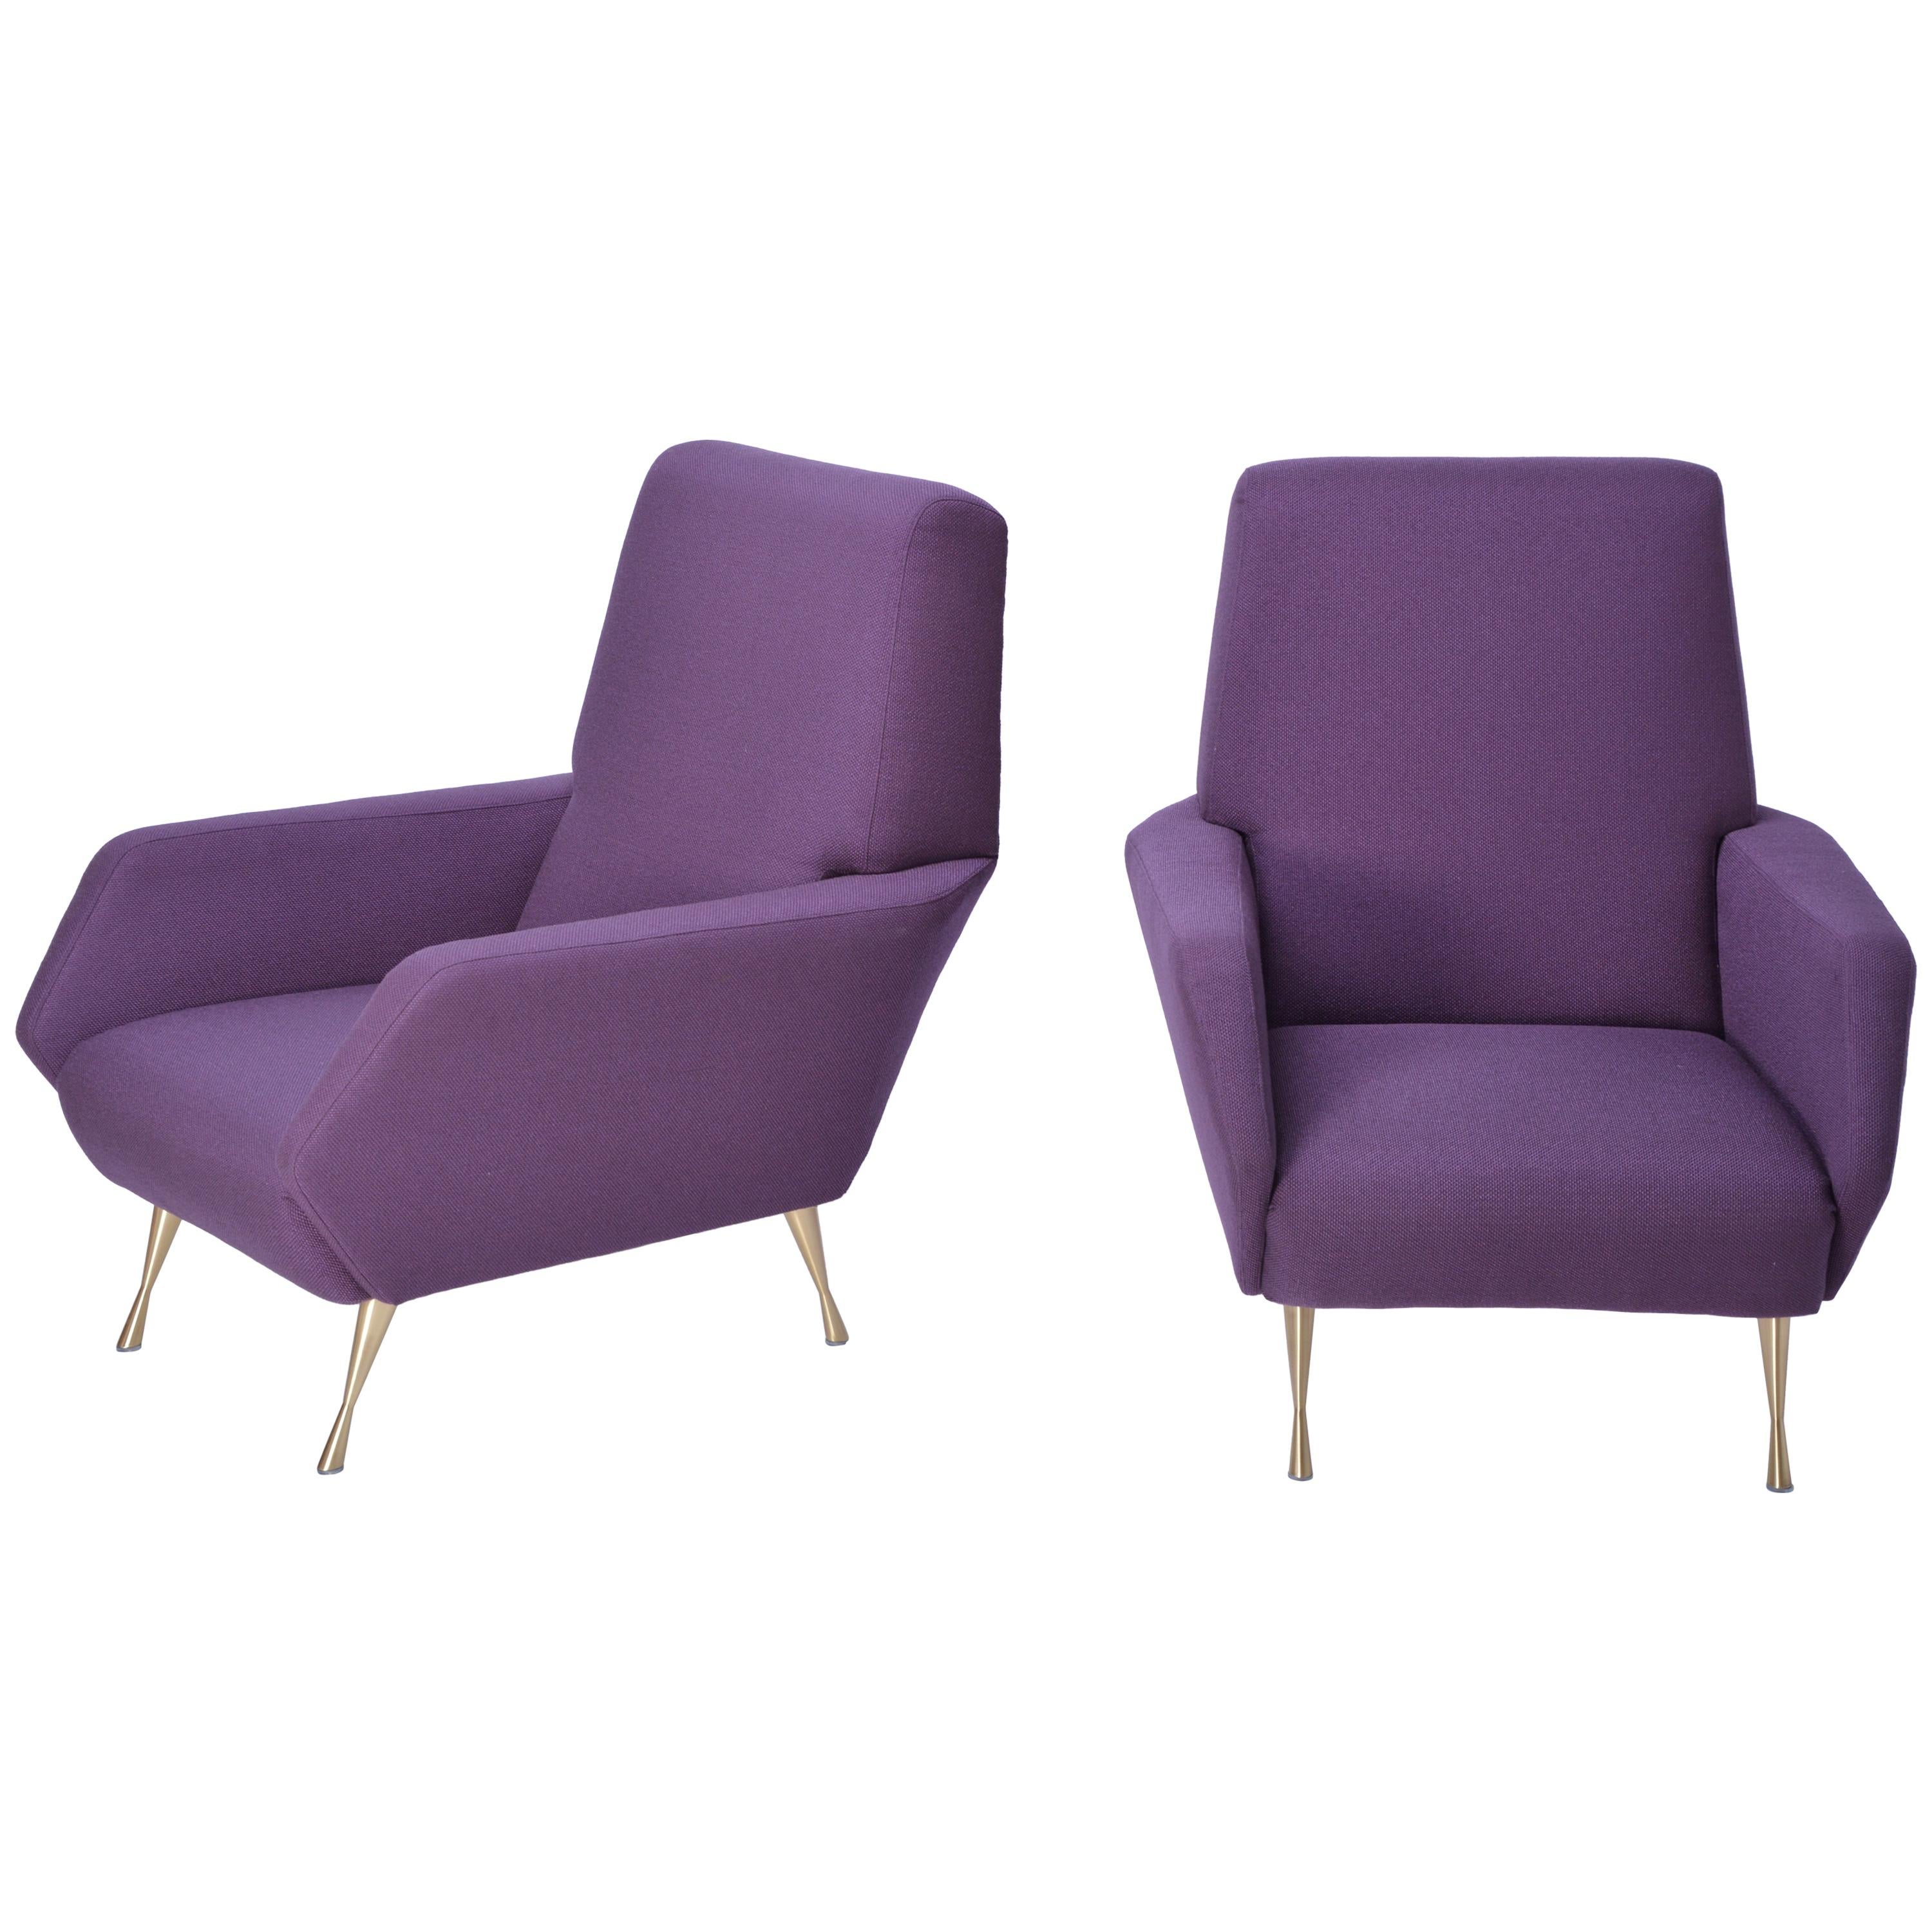 Pair of reupholstered Mid-Century Modern purple Italian lounge chairs